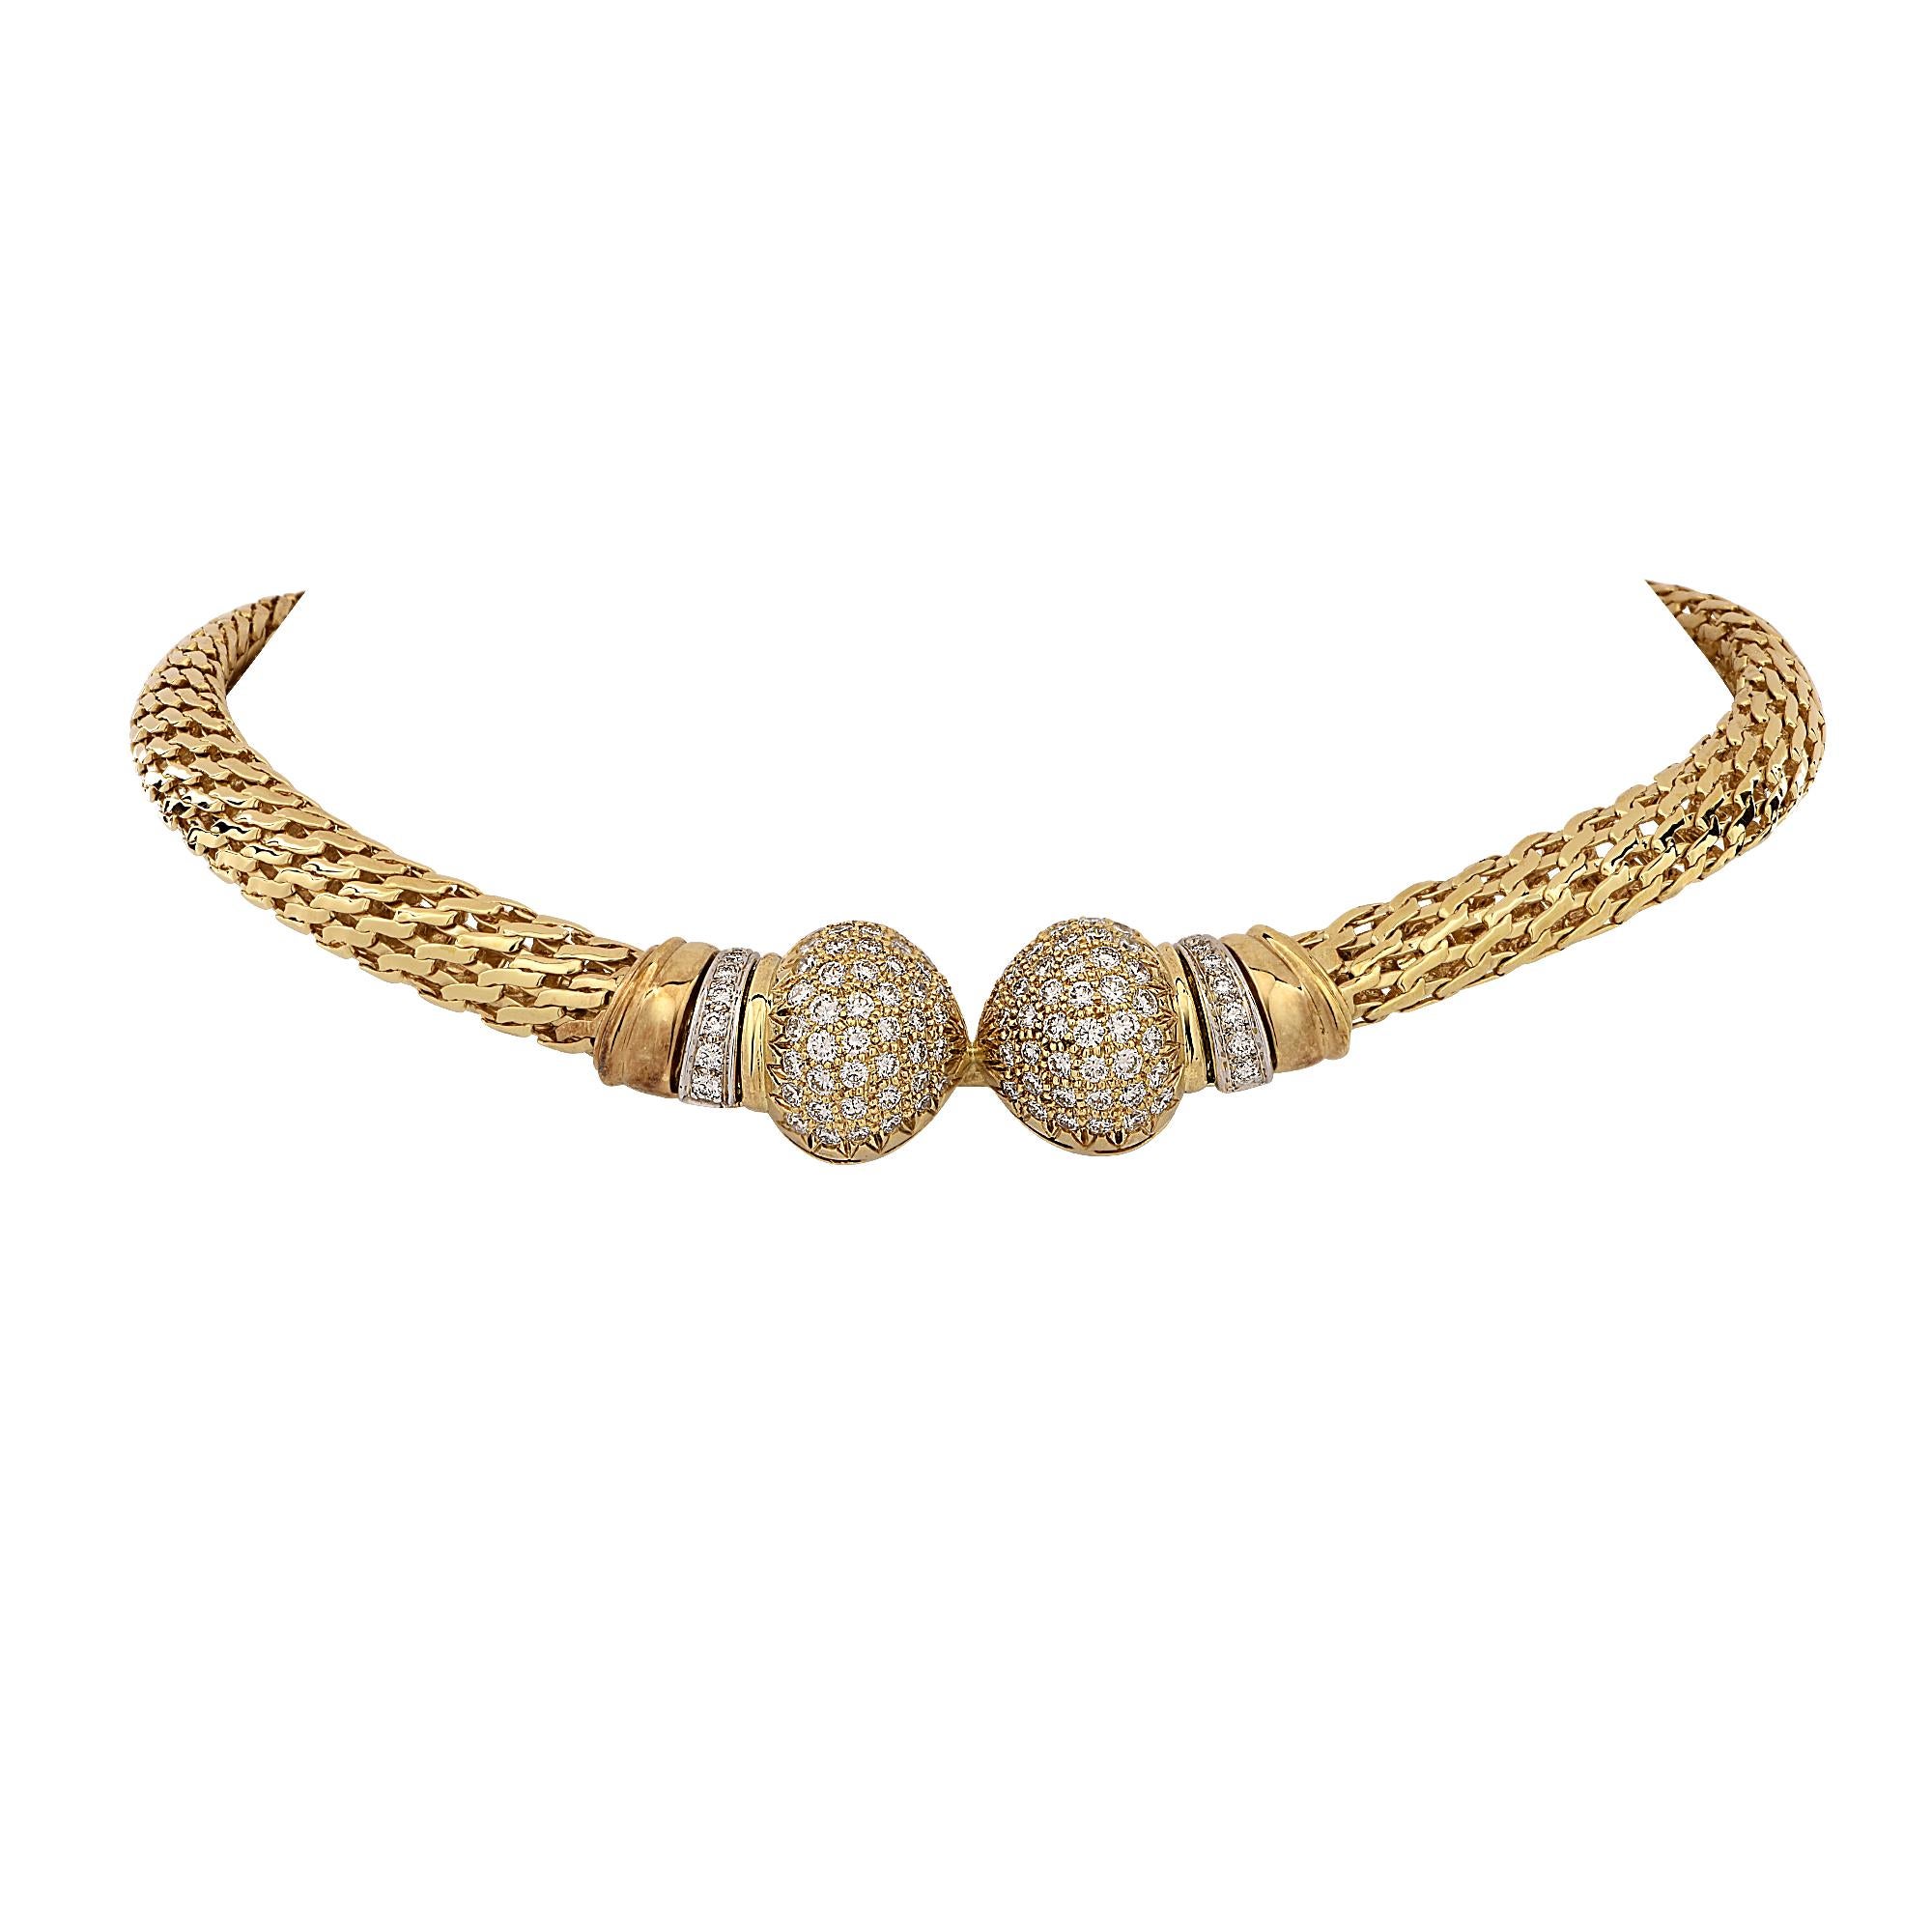 Striking necklace crafted in 18 karat yellow gold featuring 118 round brilliant cut diamonds weighing approximately 5.80cts G-H color and VS clarity. A woven 9.5 mm wide yellow gold chain snakes silkily around your neck and rests just below the